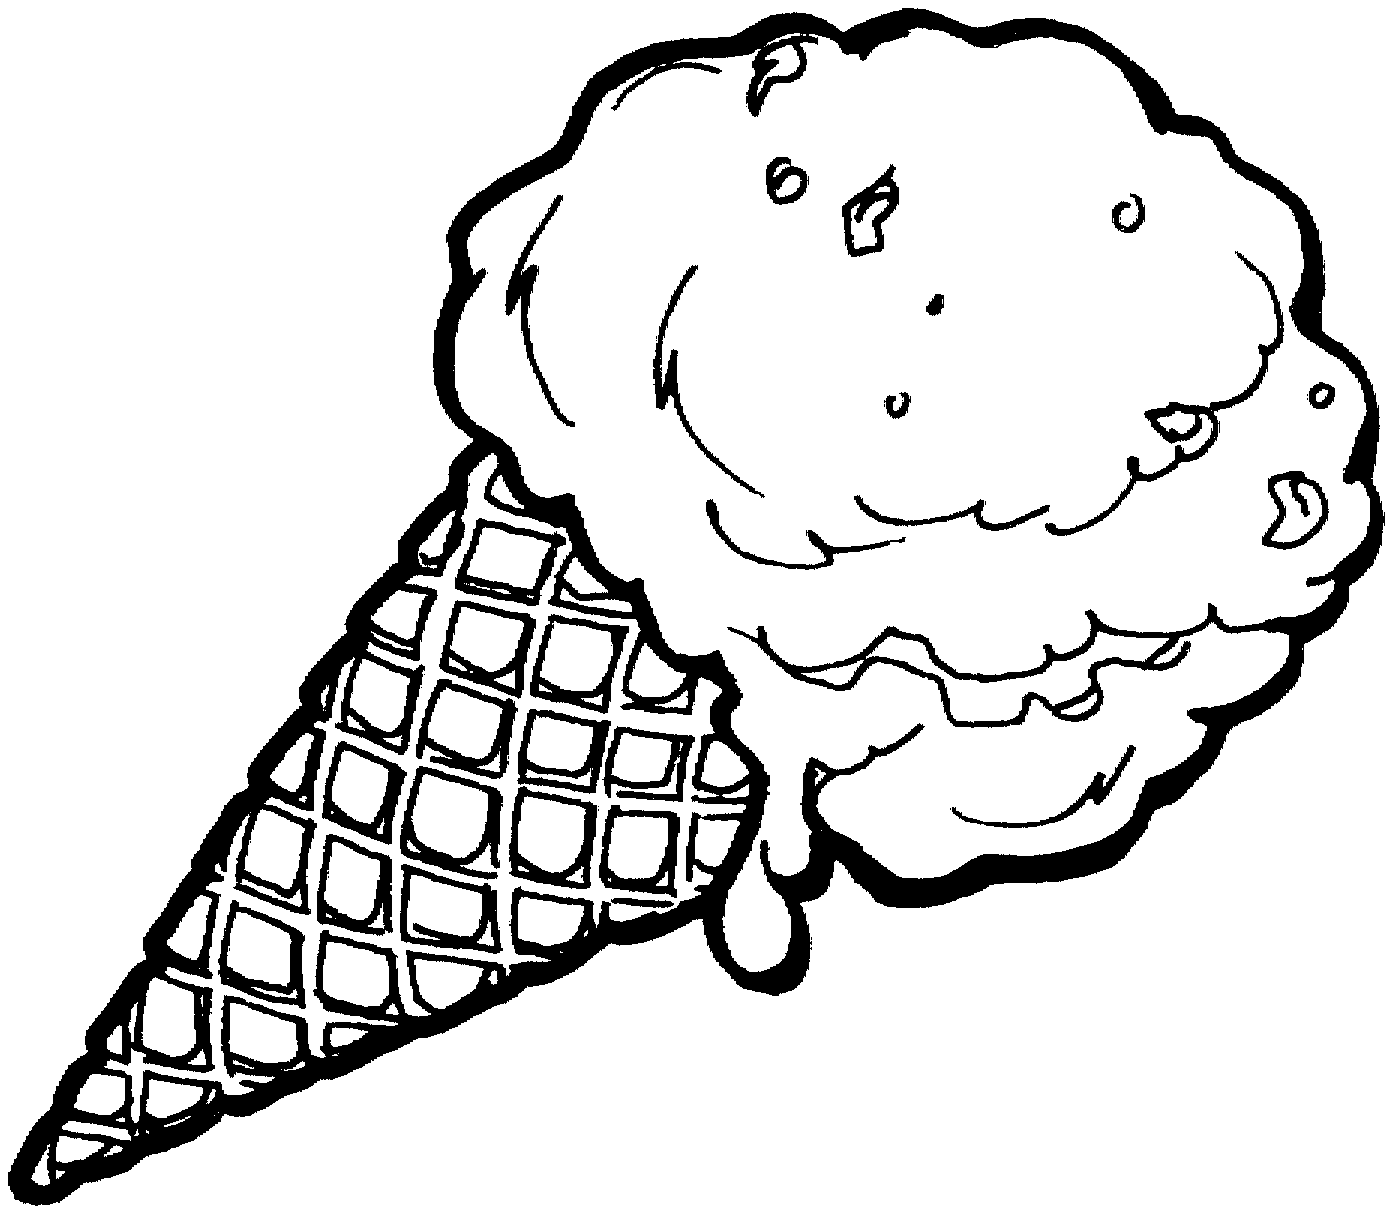 ice-cream-cone-coloring-pages - GINORMAsource Kids